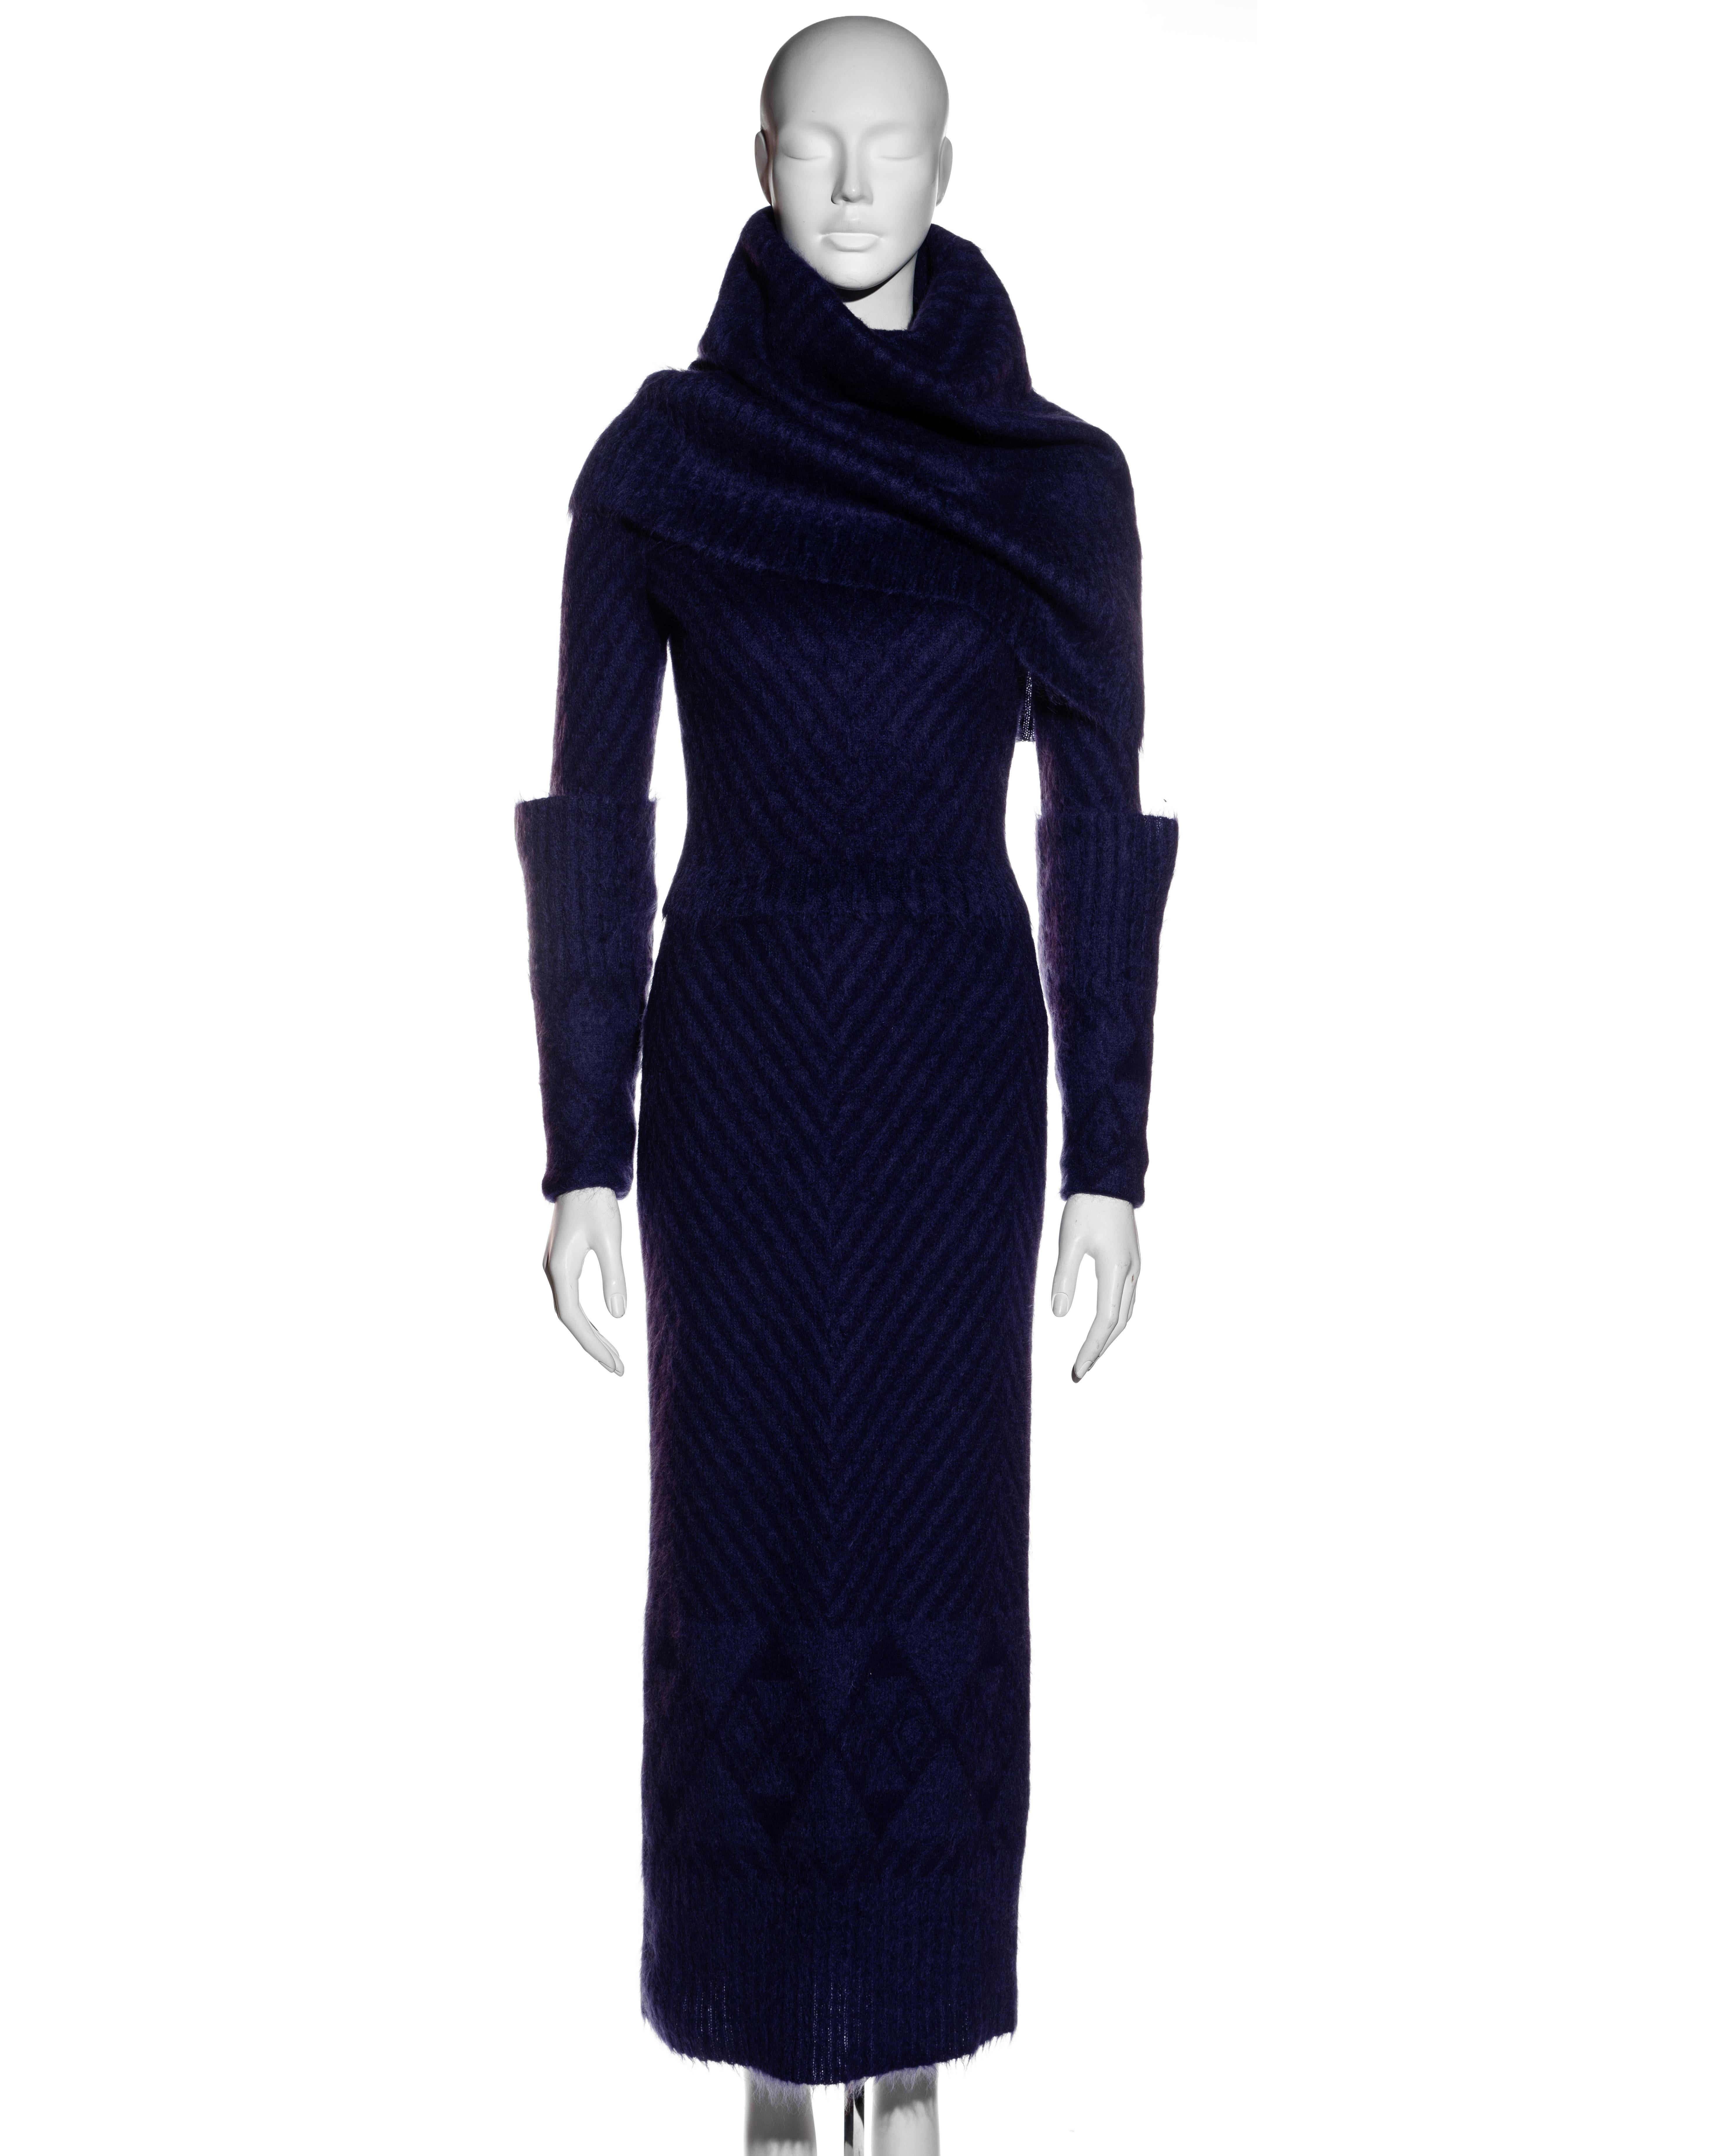 ▪ John Galliano purple mohair sweater and skirt set
▪ Black herringbone design with purple base 
▪ Turn-over cuffs 
▪ Large high-neck fold-over collar 
▪ Ankle-length skirt 
▪ 40% Mohair, 32% Wool, 18% Nylon, 10% Angora 
▪ Size Small
▪ Fall-Winter